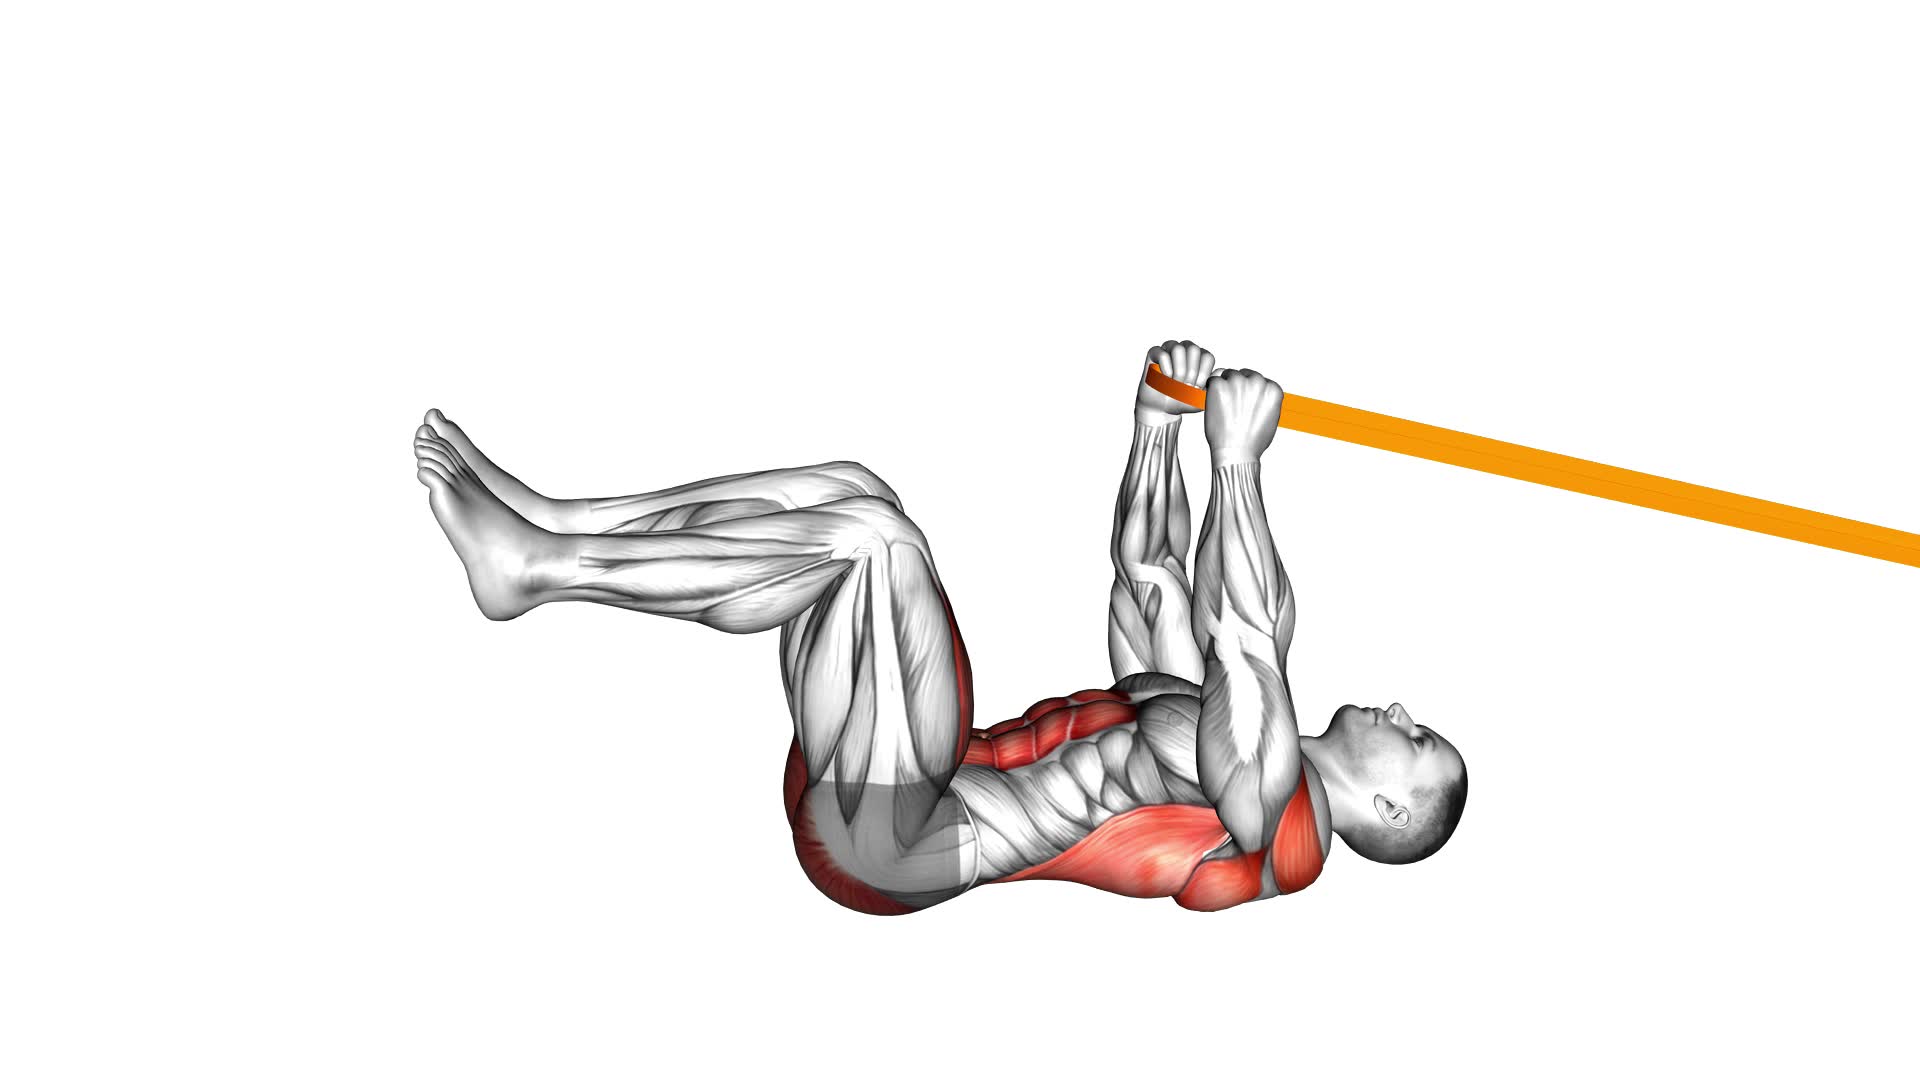 Resistance Band Upper Body Dead Bug - Video Exercise Guide & Tips